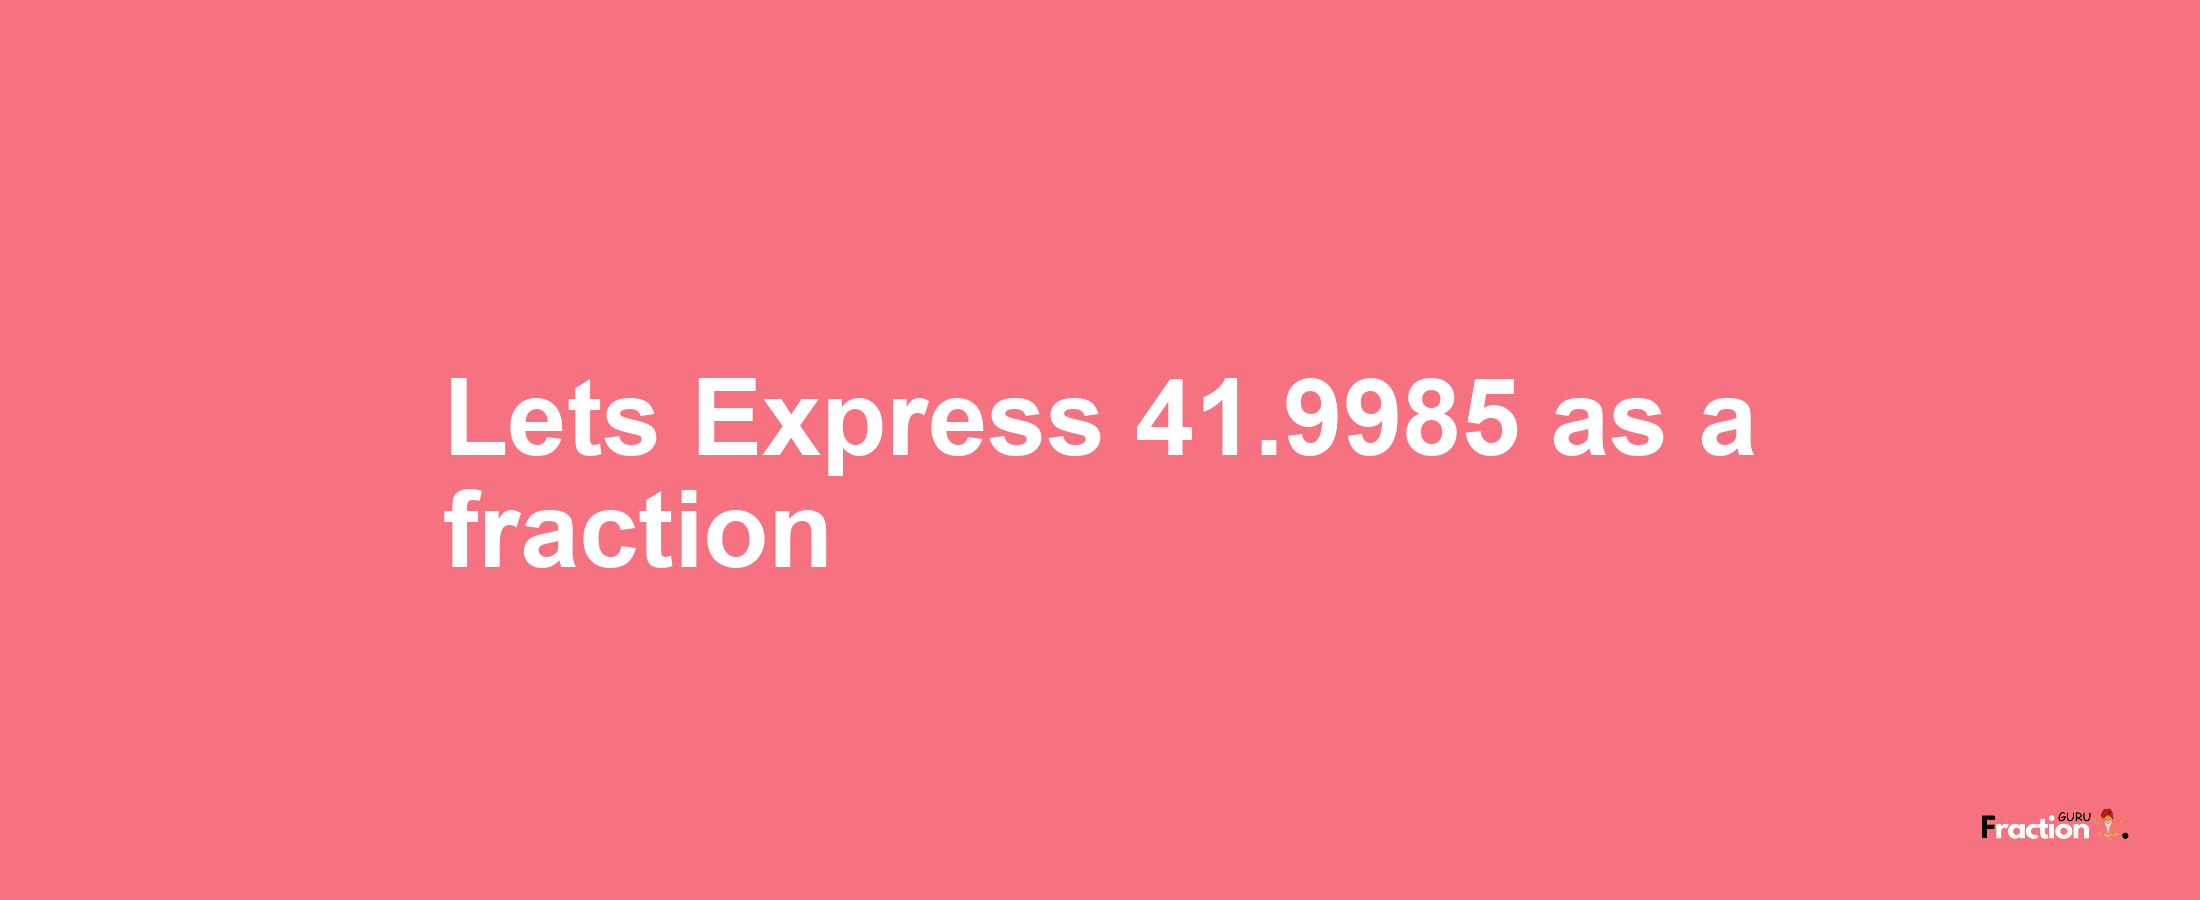 Lets Express 41.9985 as afraction